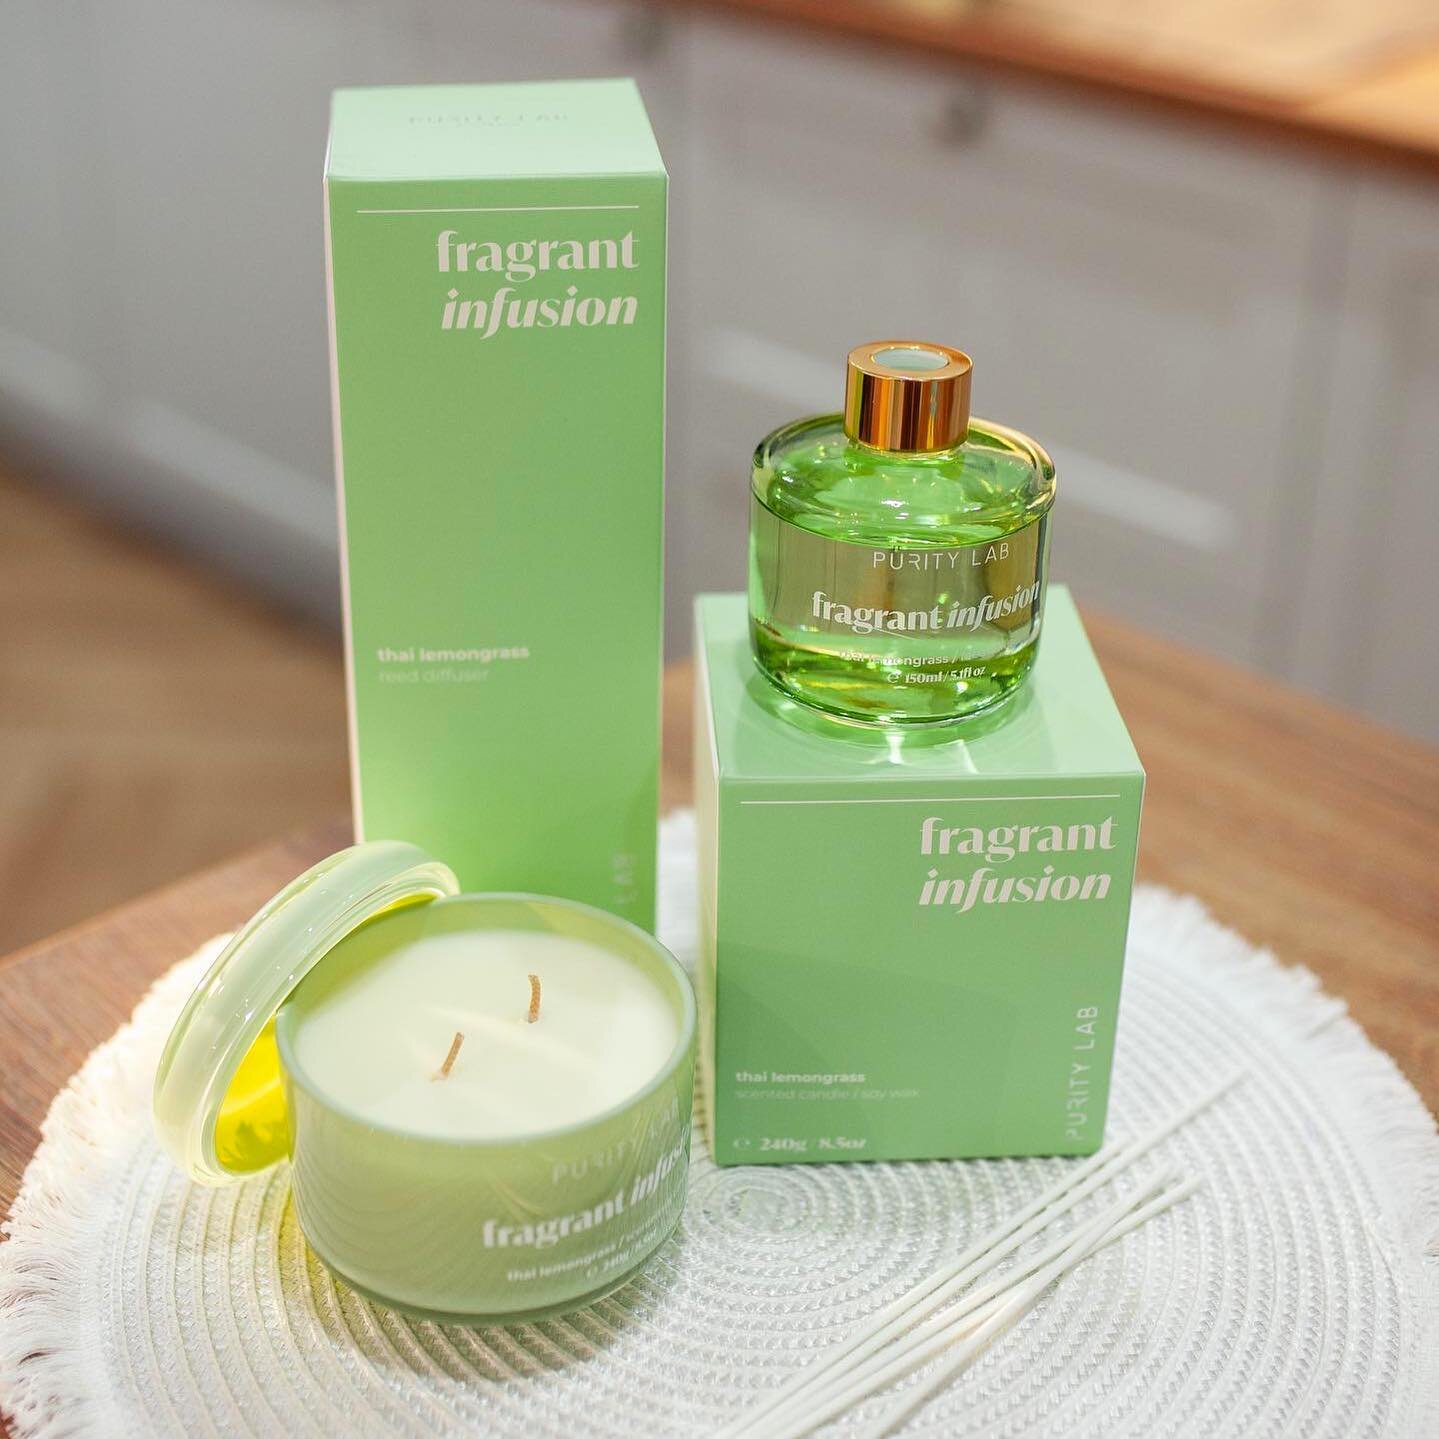 A modern and stylish Purity Lab collection called Fragrant Infusion for @kaktus_ukraine